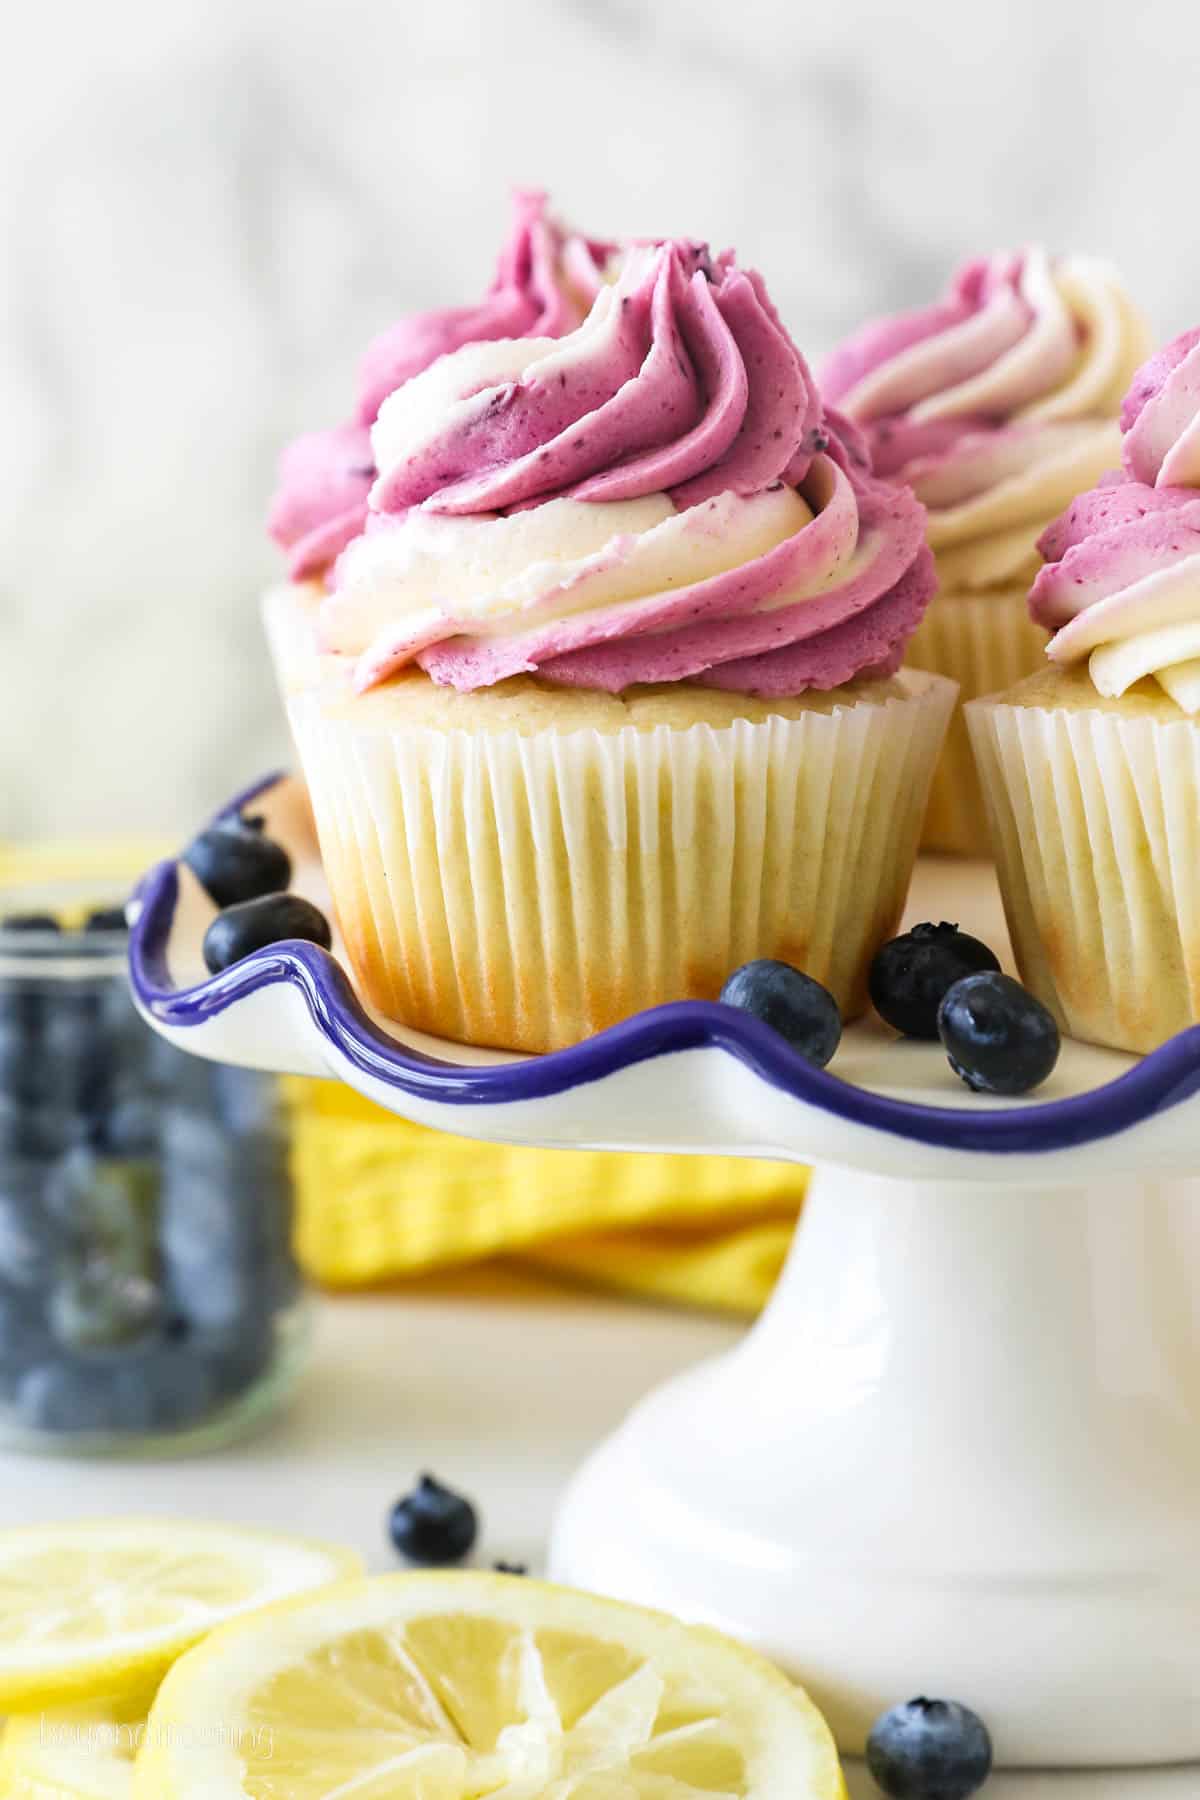 A white cake stand with lemon cupcakes frosted with a swirl of vanilla and blueberry frosting. The cake stand is surrounded by fresh cut lemons and blueberries